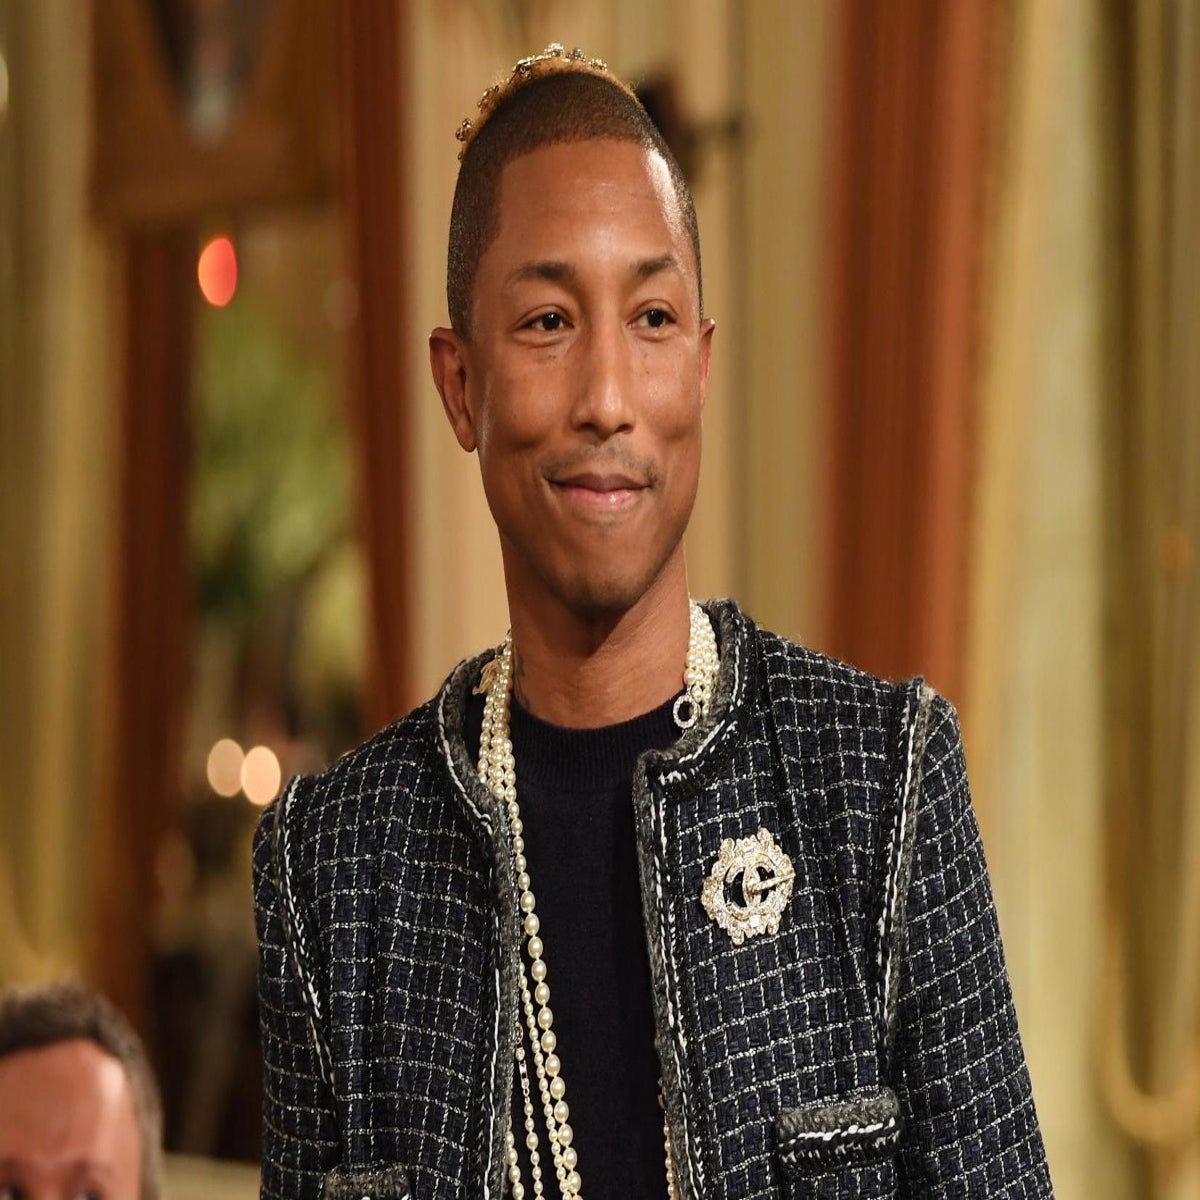 Cara Delevingne and Pharrell sing duet for Chanel film